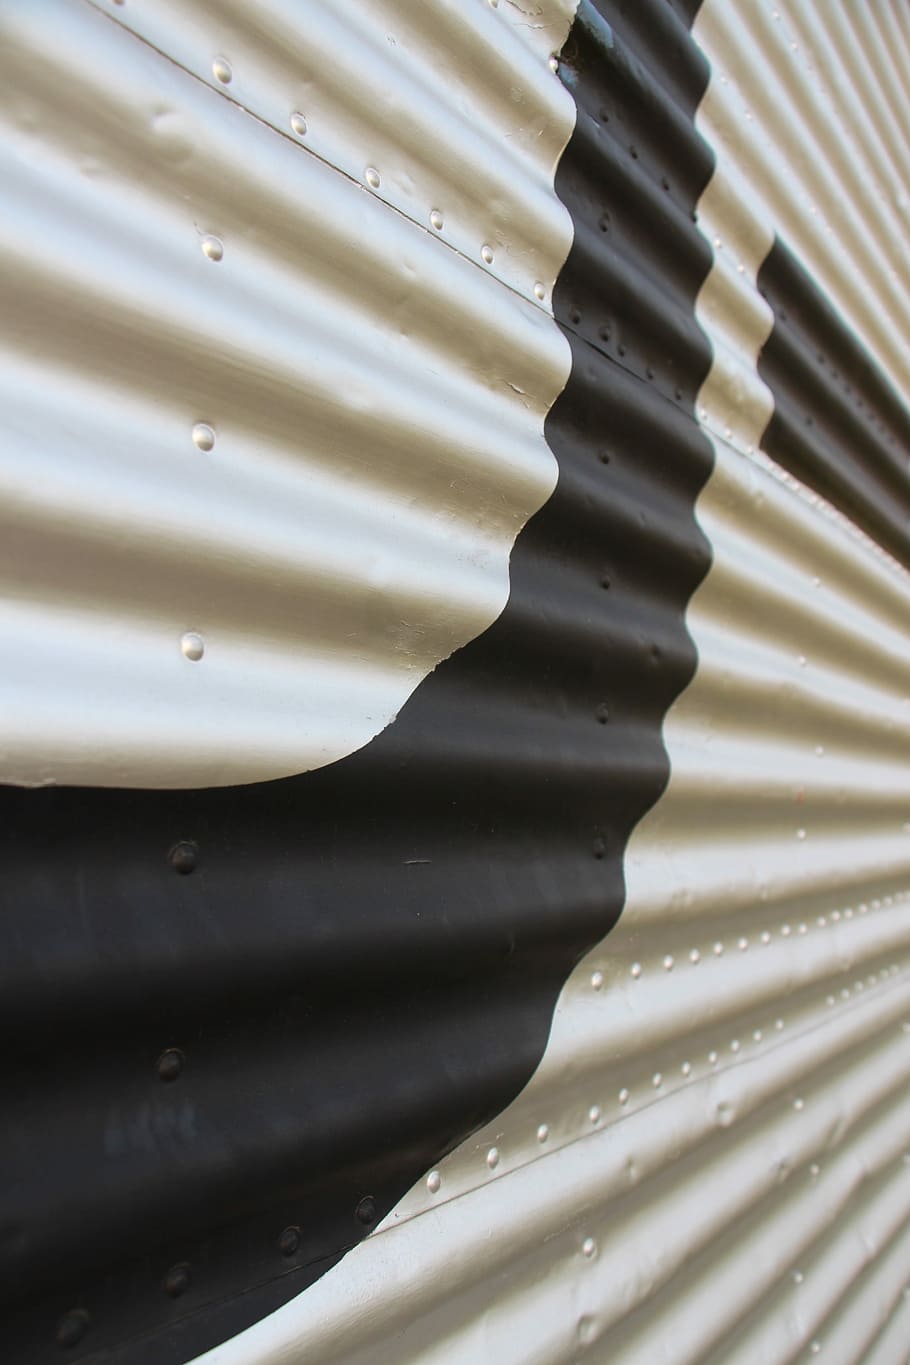 Aircraft, Sheet, Corrugated, Ju-52, corrugated sheet, backgrounds, abstract, metal, industry, close-up